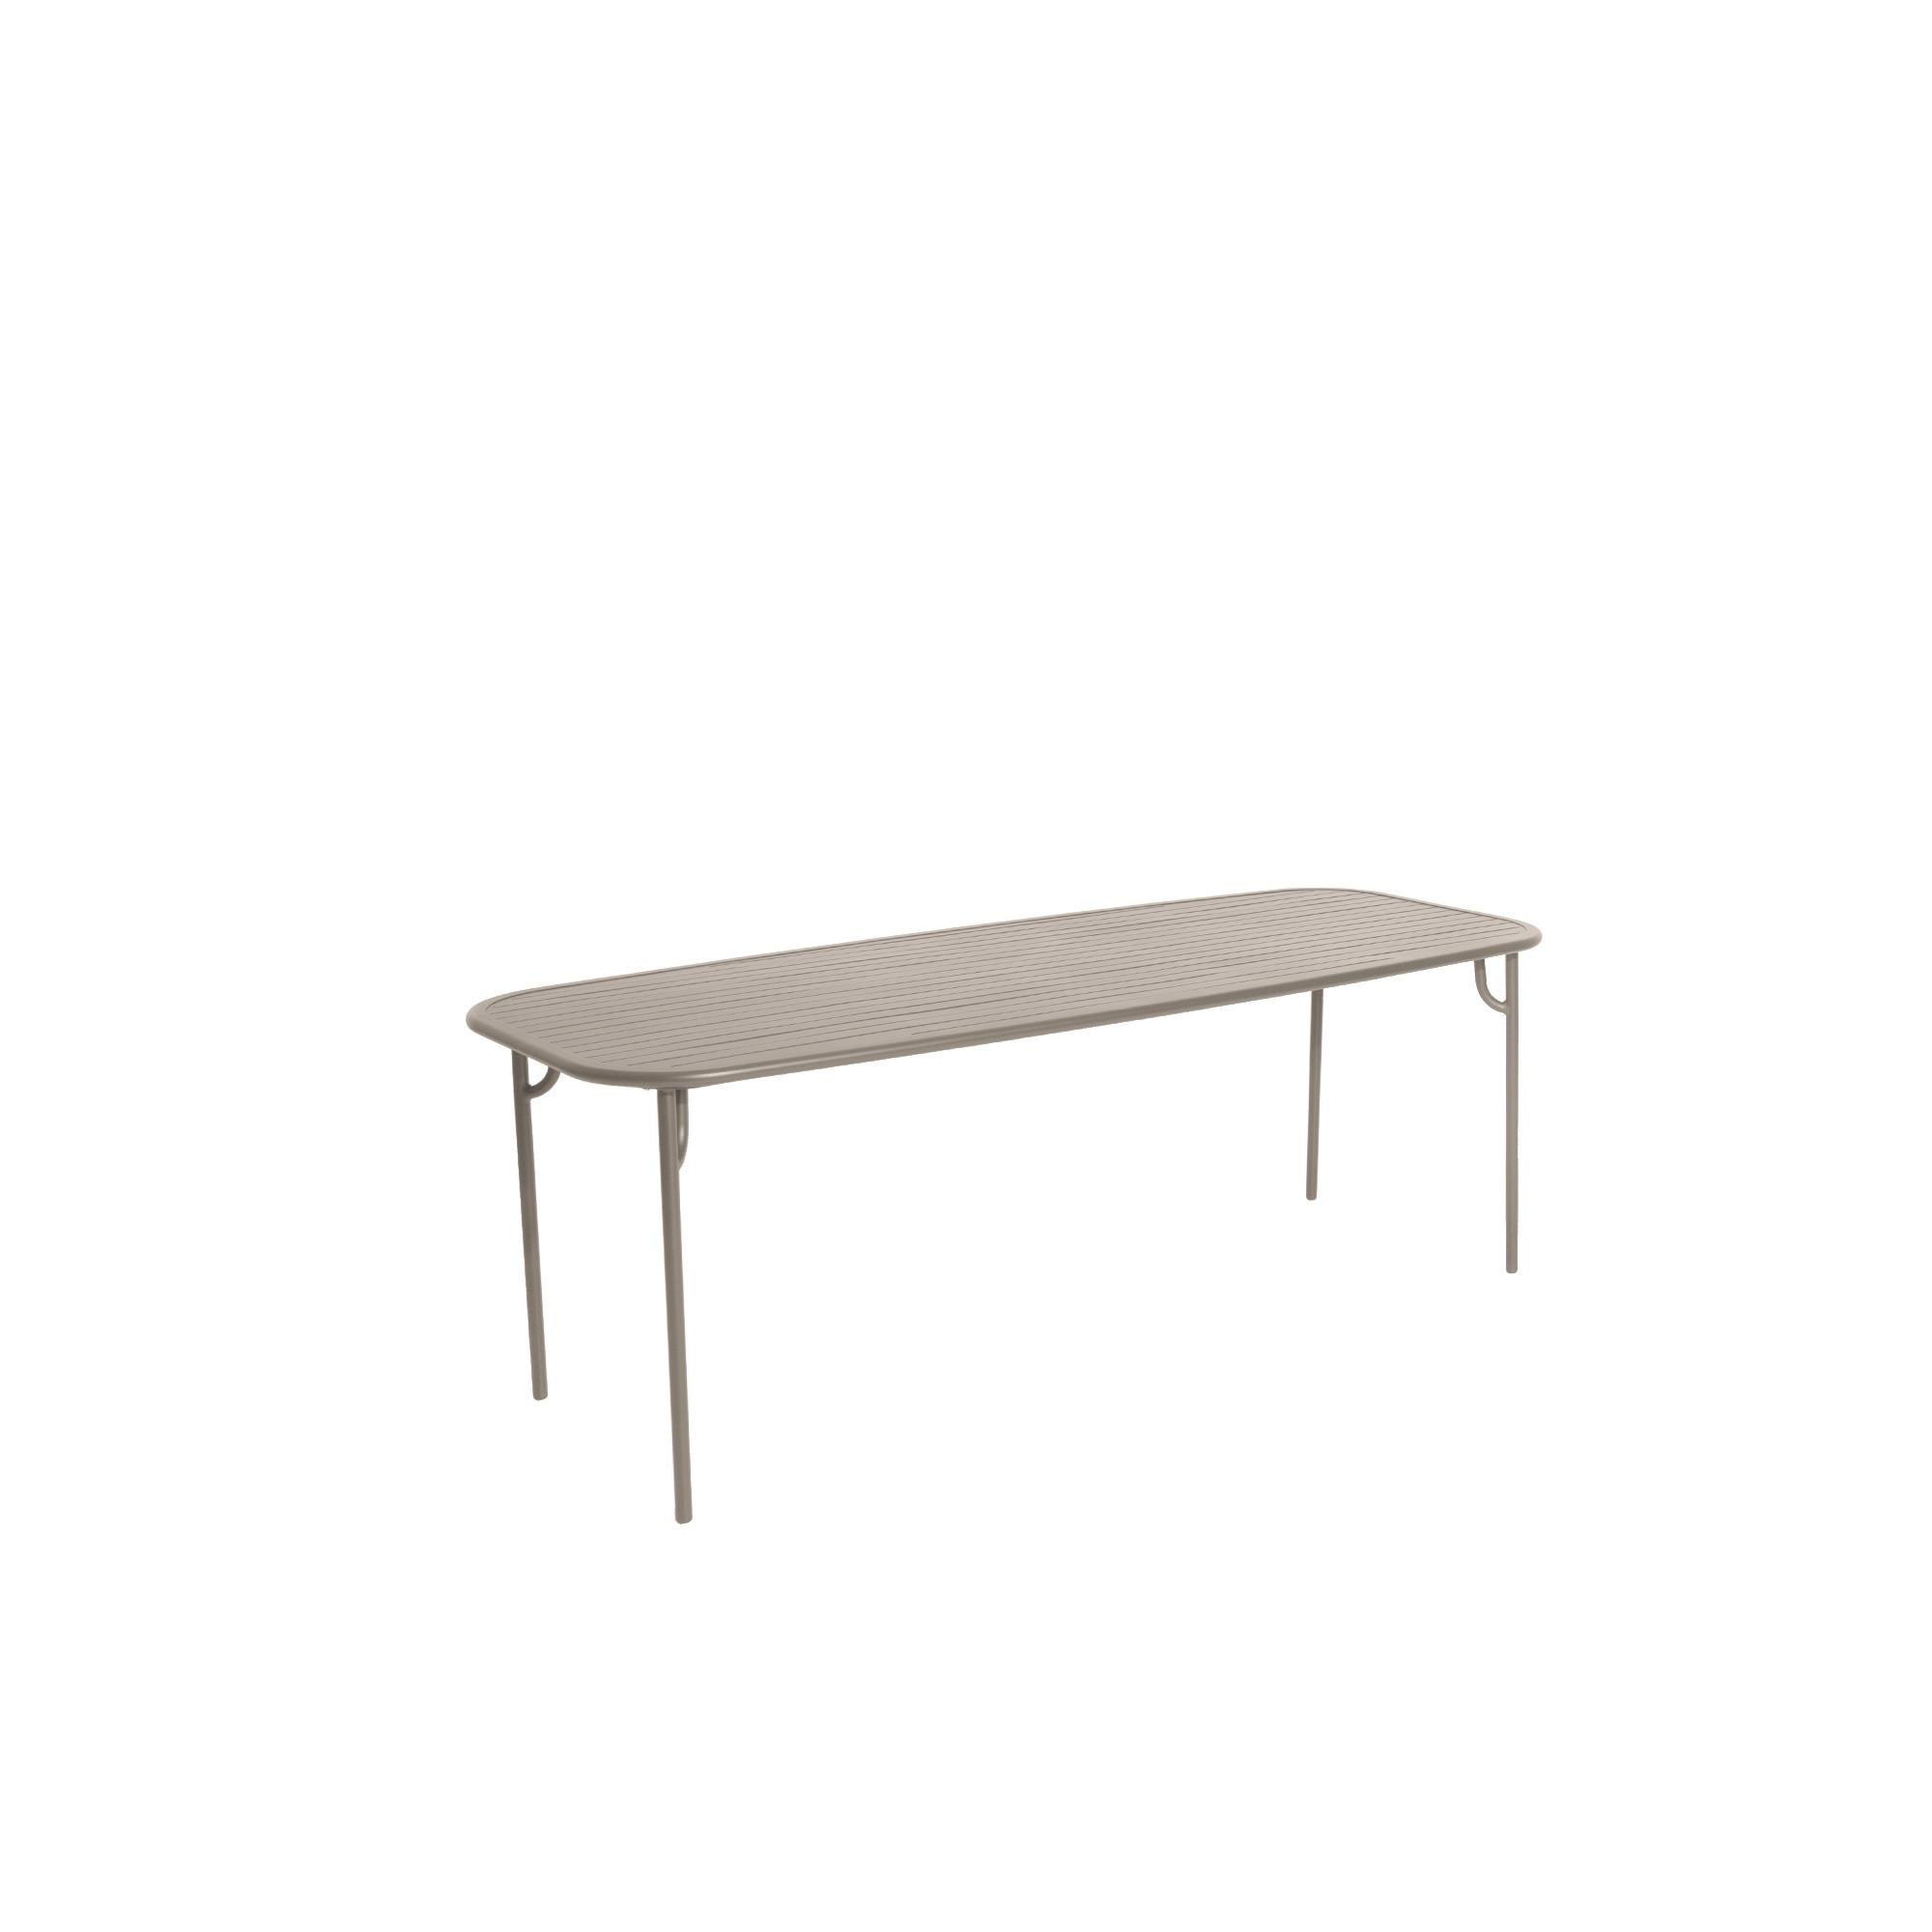 Petite Friture Week-End Large Rectangular Dining Table in Dune Aluminium with Slats by Studio BrichetZiegler, 2017

The week-end collection is a full range of outdoor furniture, in aluminium grained epoxy paint, matt finish, that includes 18